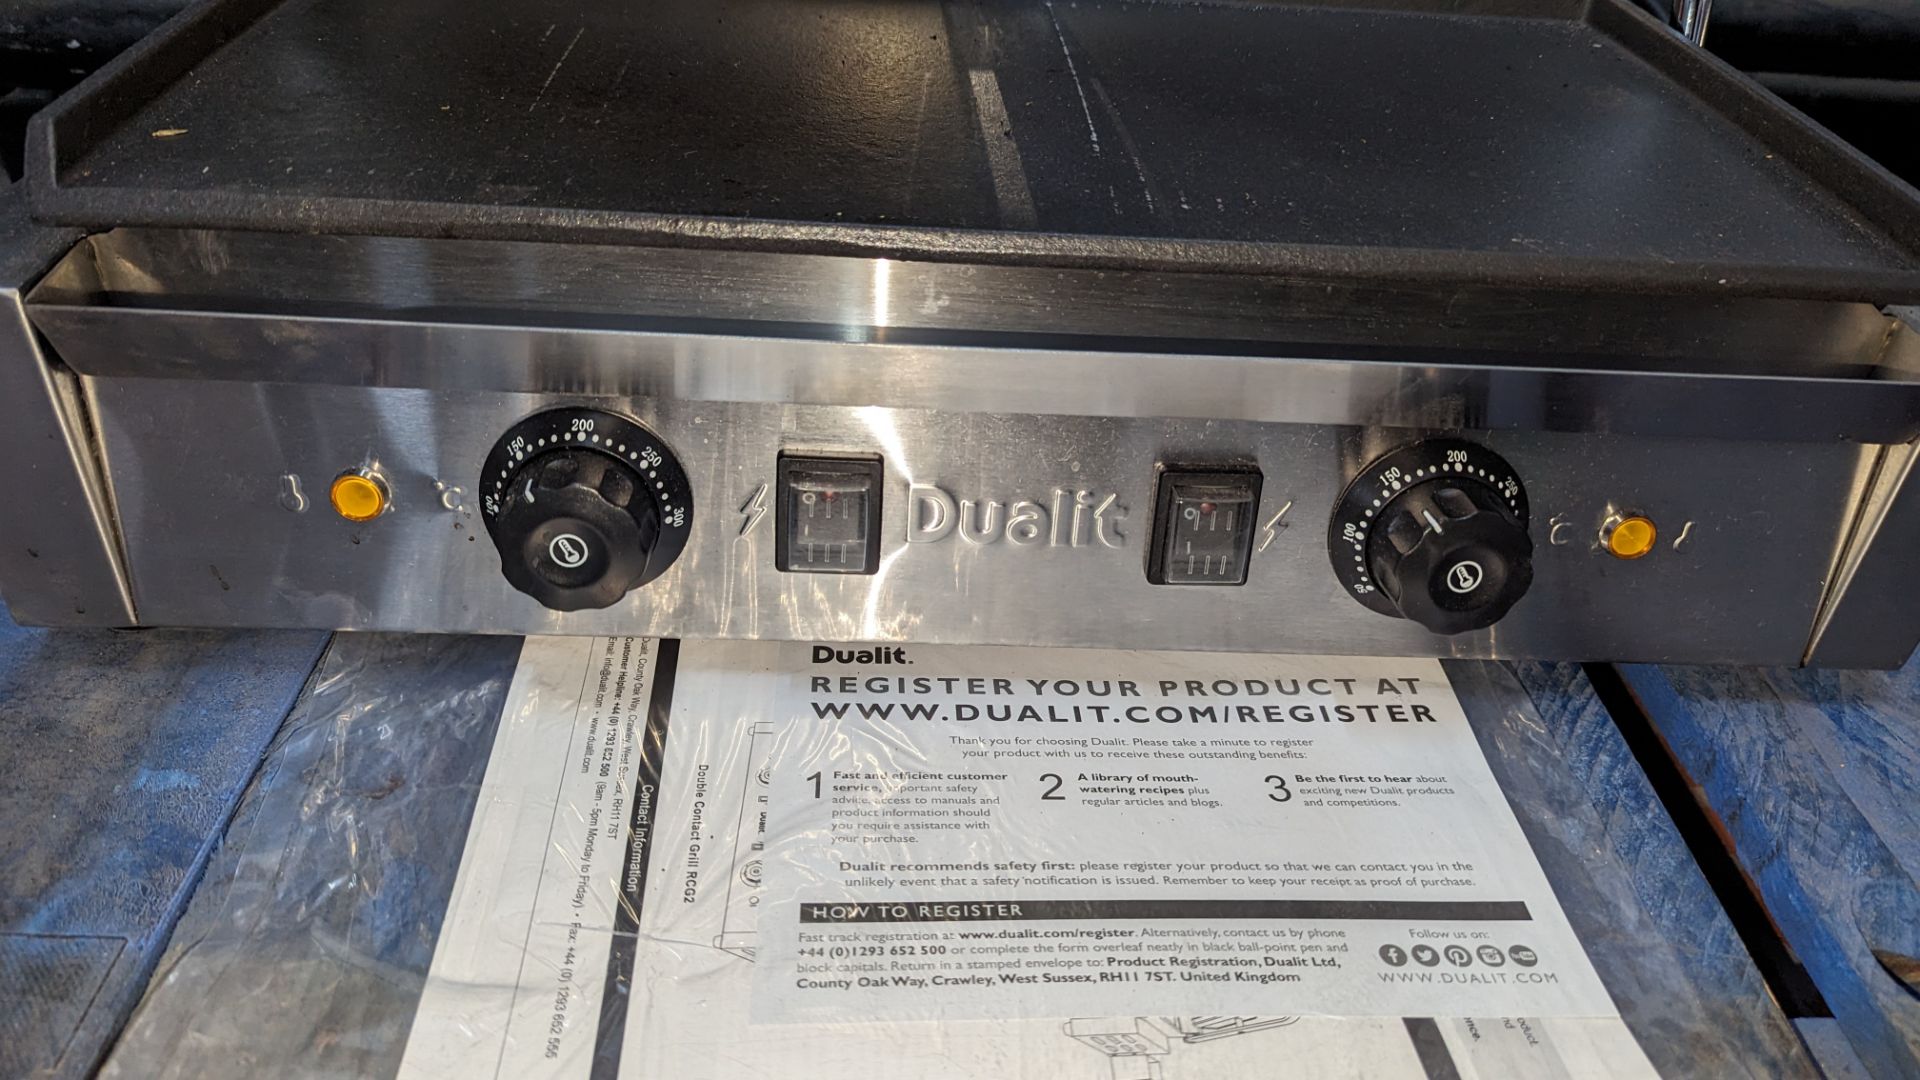 Dualit RCG2 double panini contact grill, including manual - Image 6 of 8